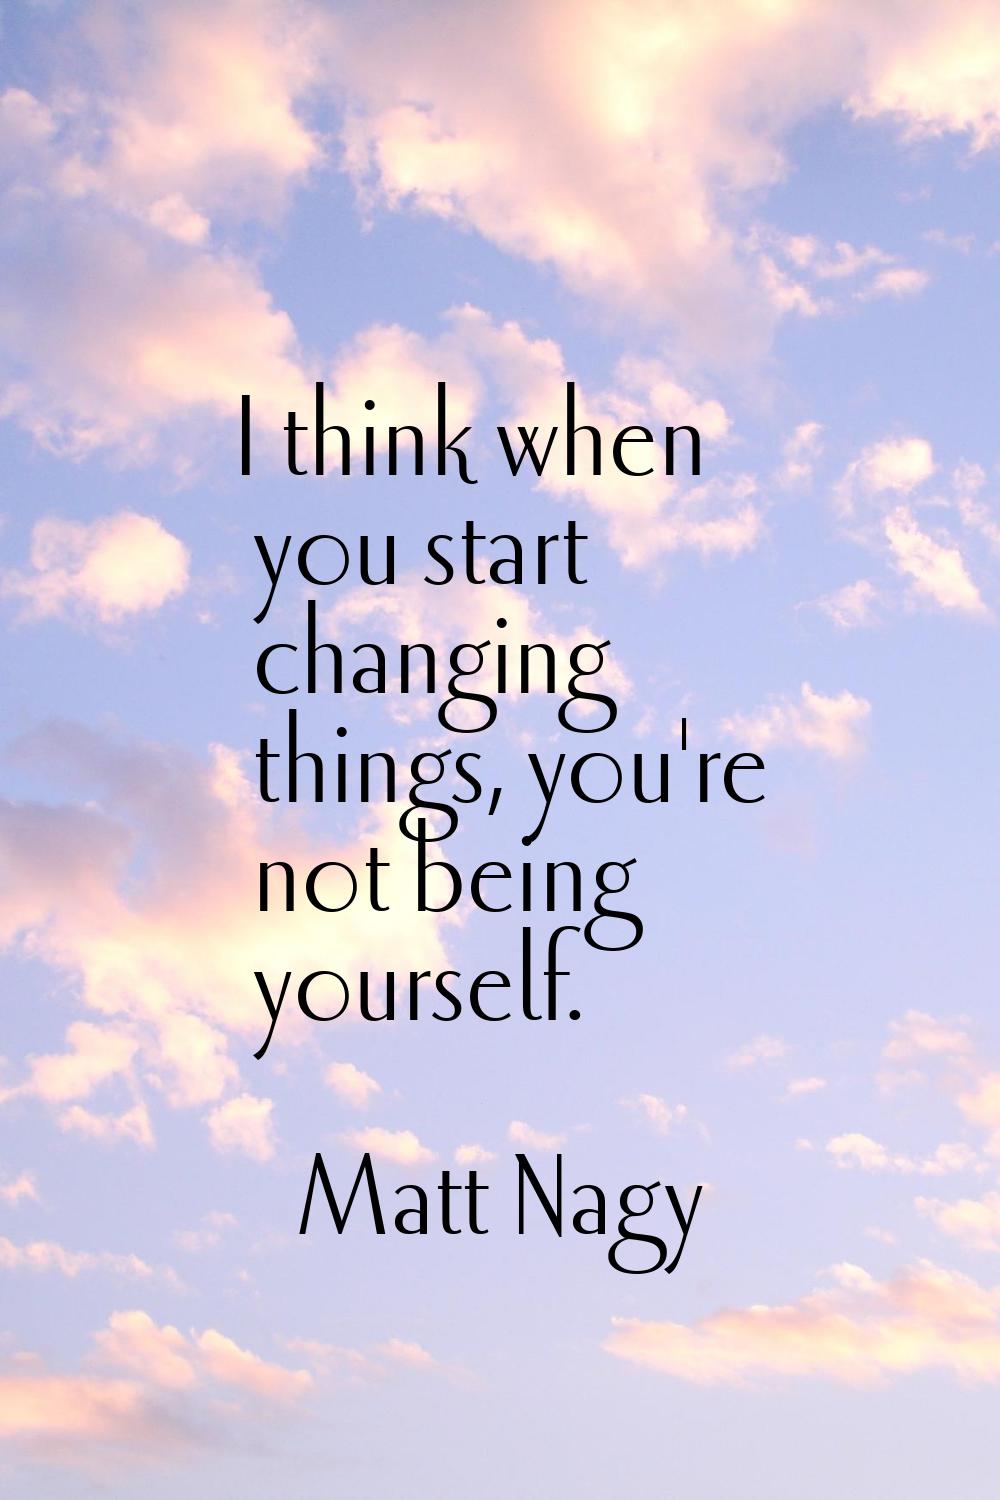 I think when you start changing things, you're not being yourself.